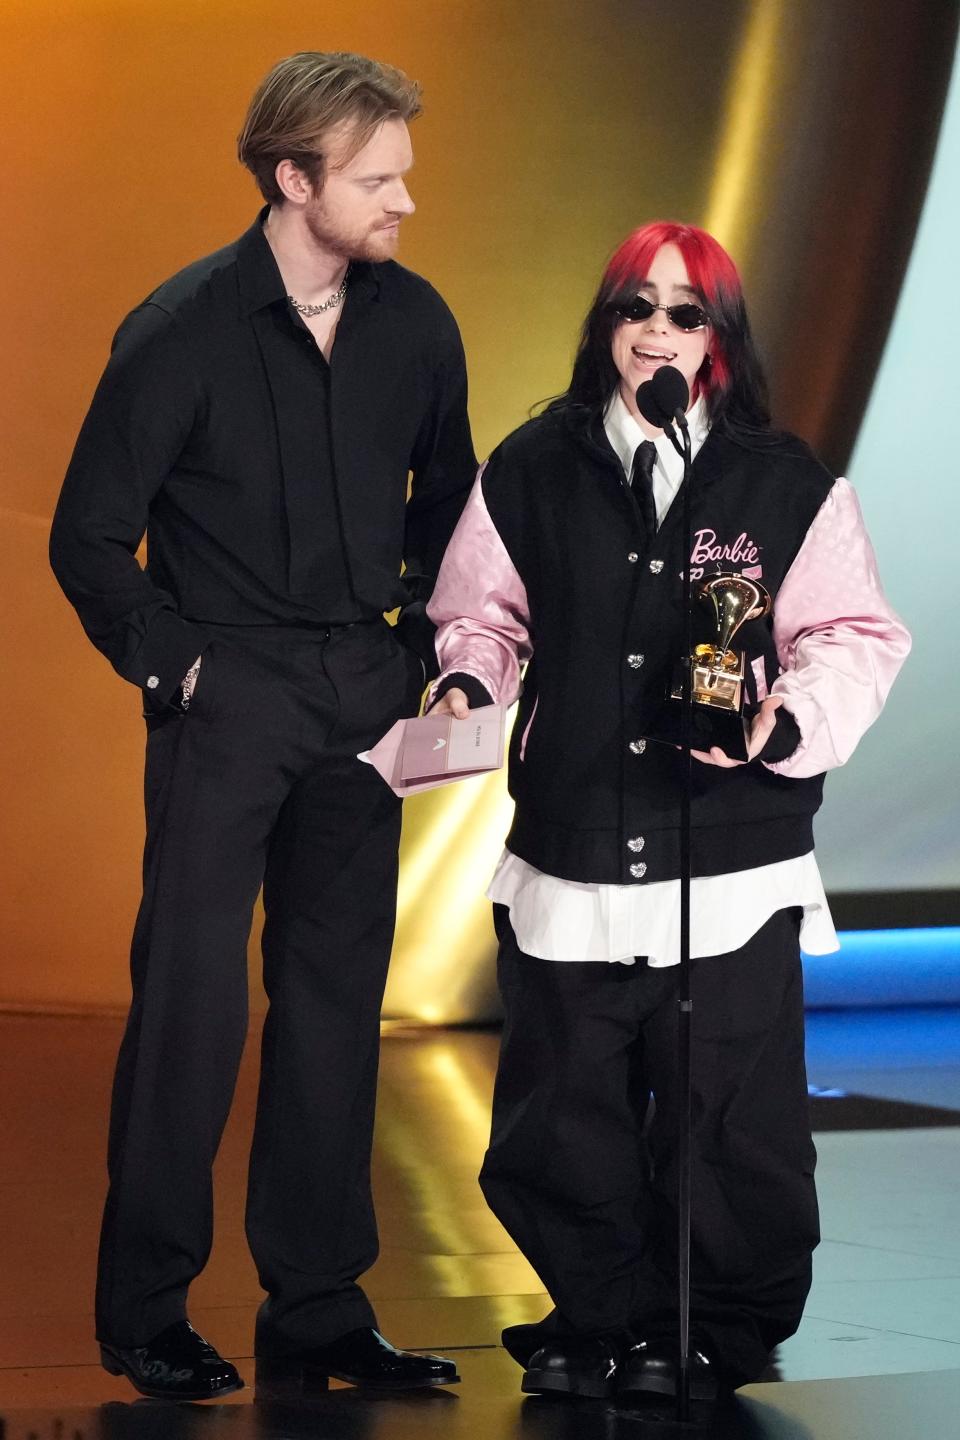 Billie Eilish, right, and FINNEAS accept the award for song of the year.